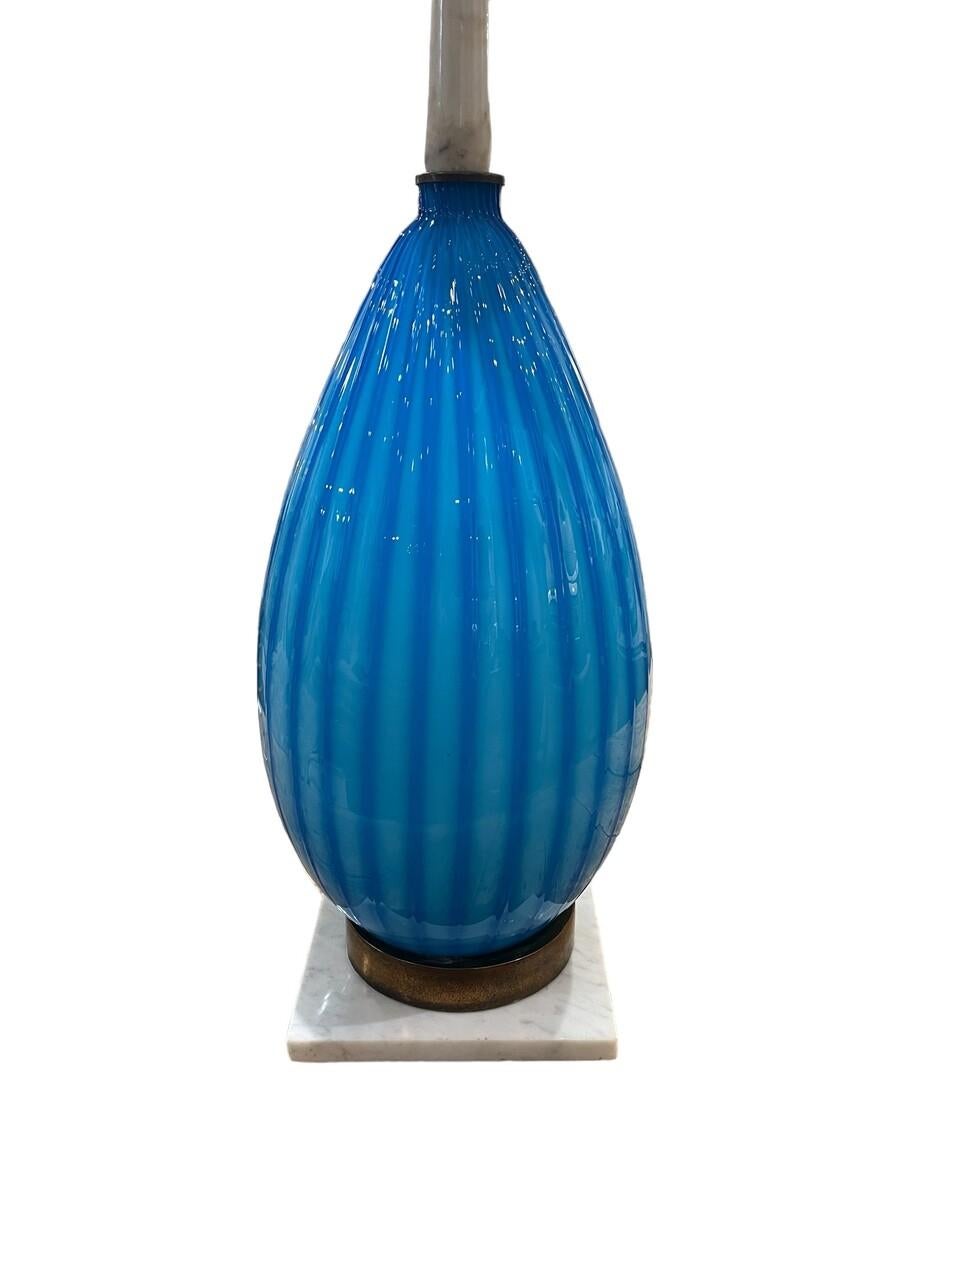 Elevate your space with timeless elegance courtesy of this exquisite Murano lamp. Standing at an impressive 41 inches, its hand-blown blue glass exudes sophistication. The marble base and neck add a touch of opulence, while the Italian craftsmanship